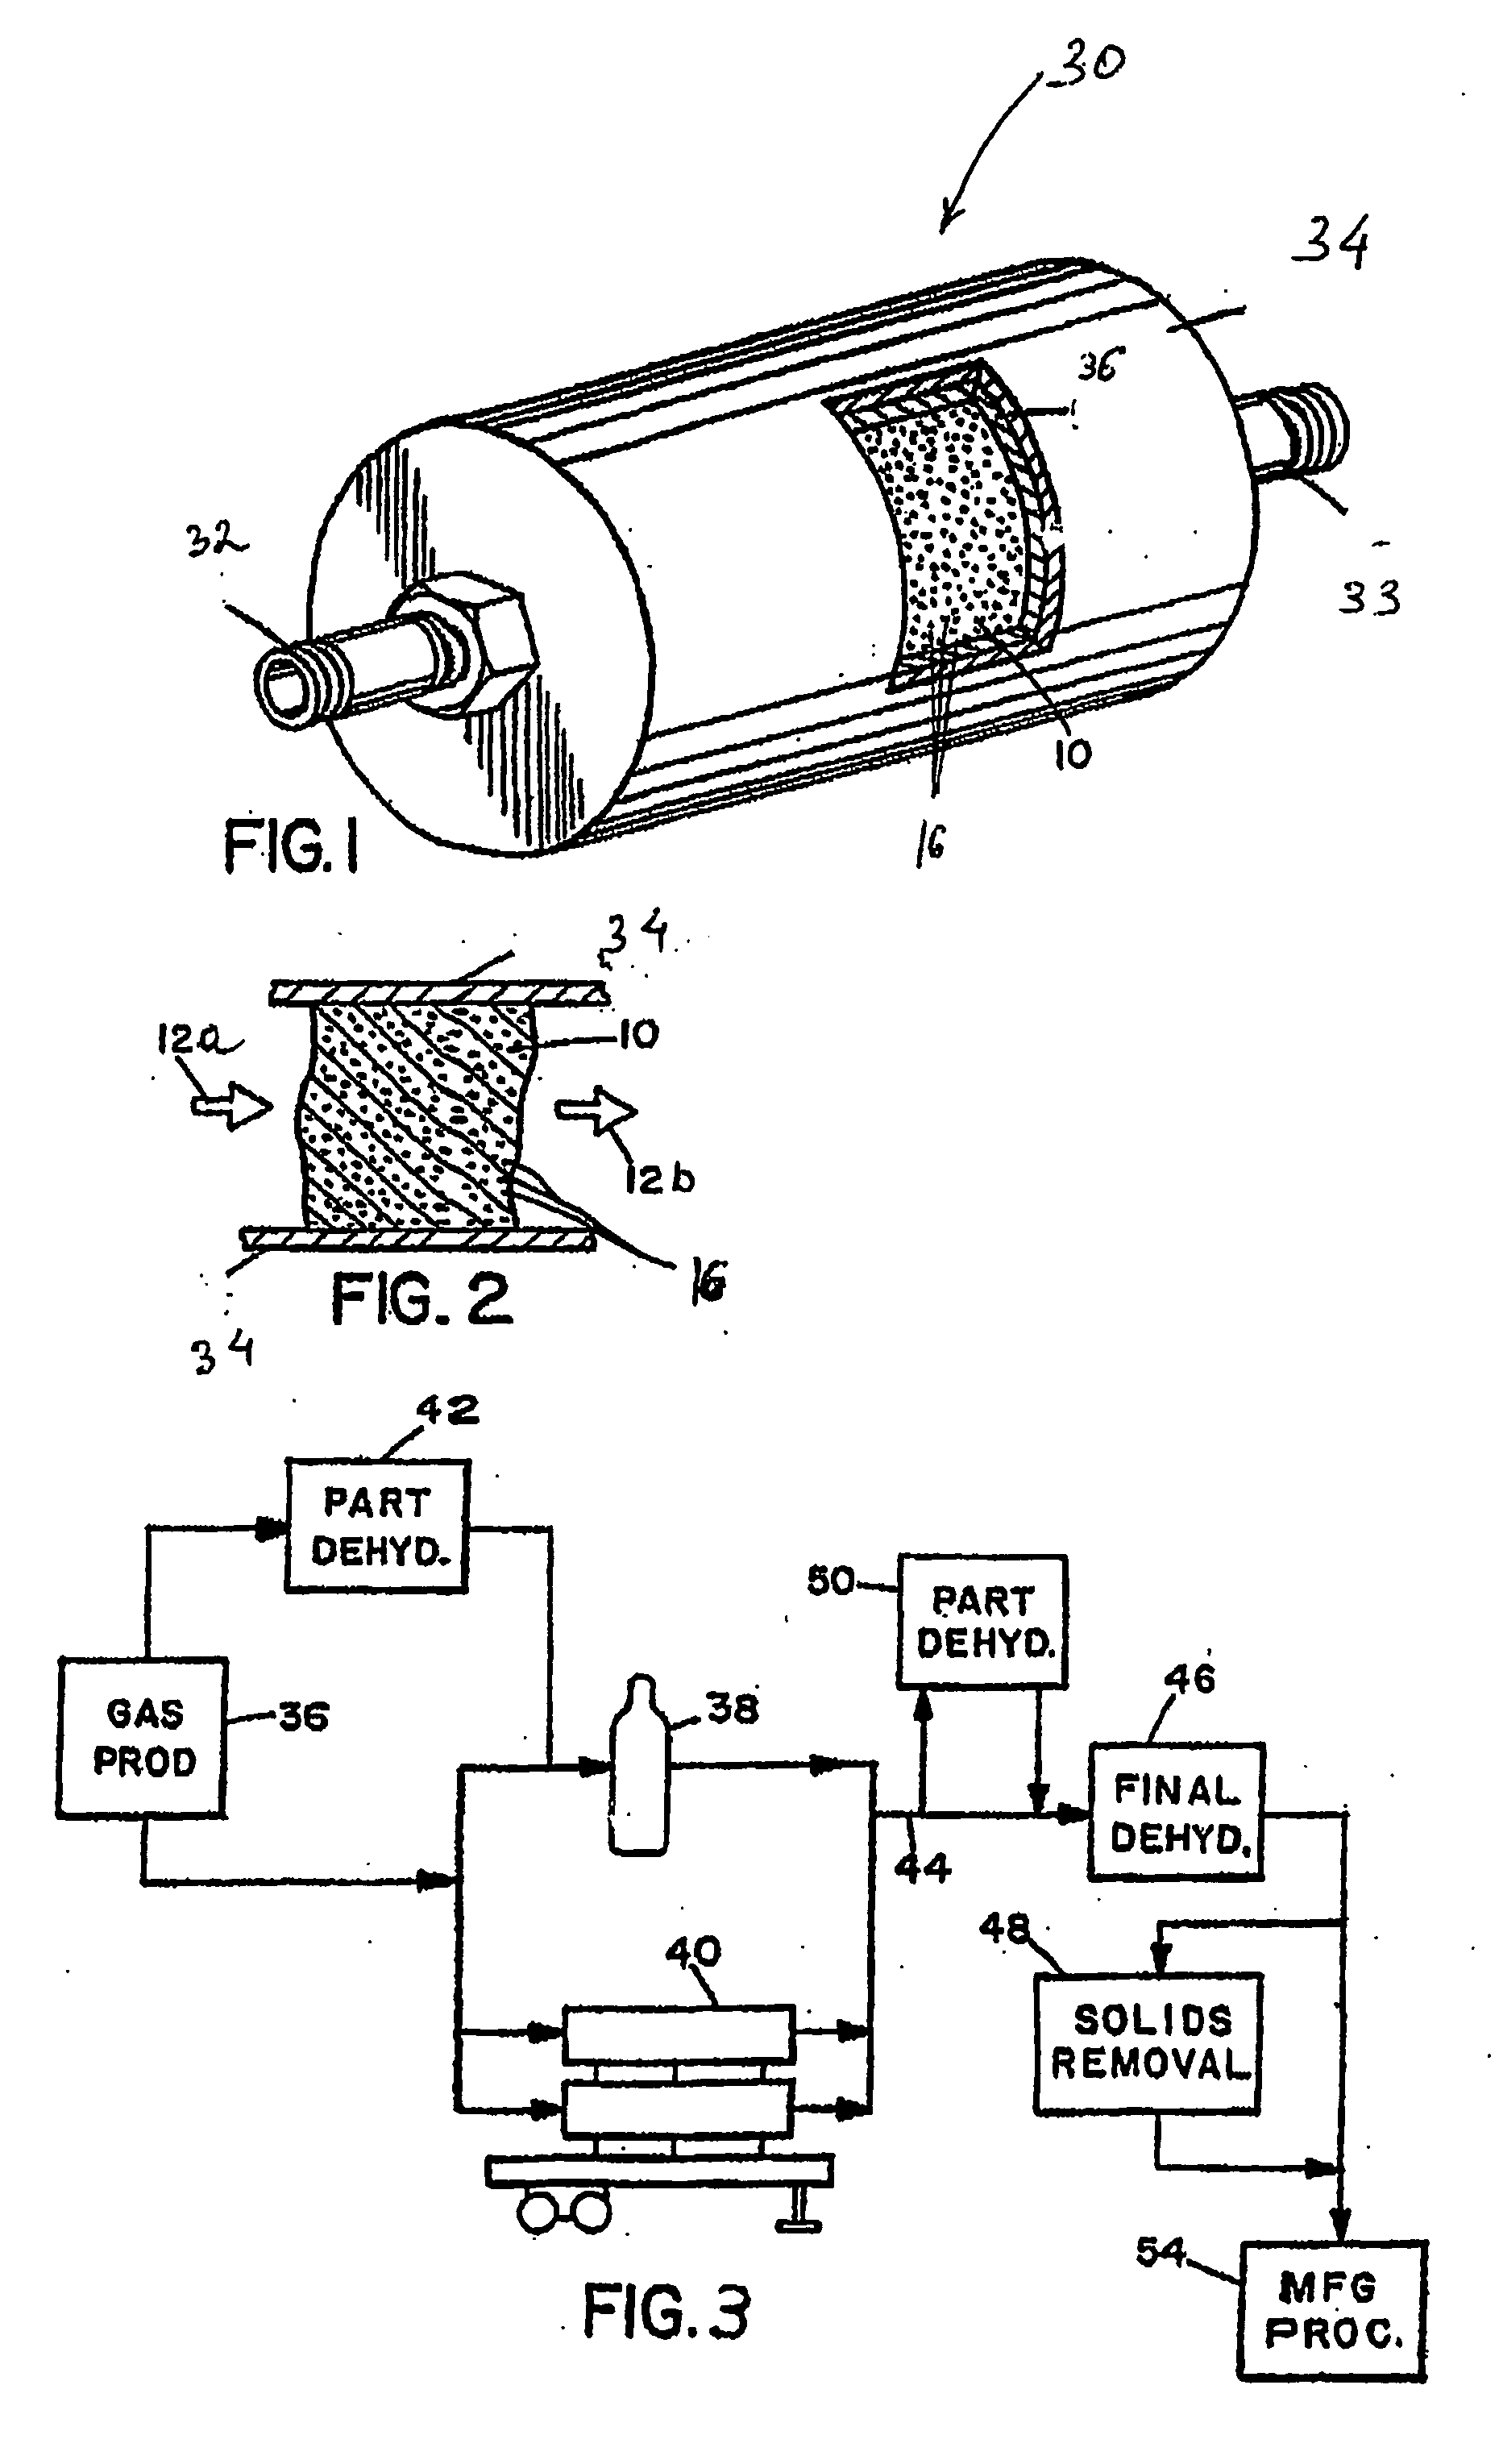 Apparatus and method for purification of corrosive gas streams